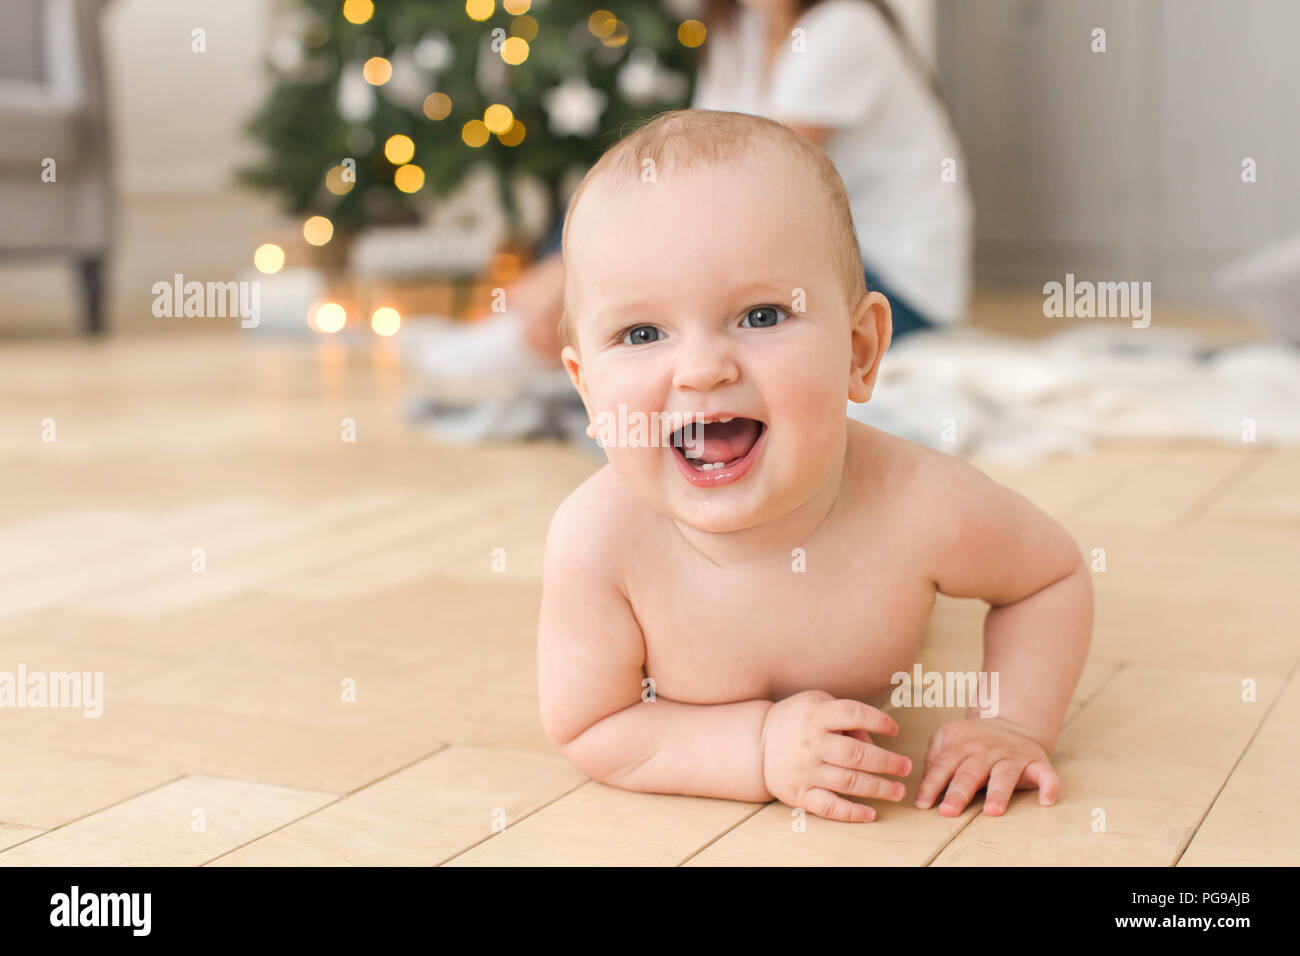 Baby lying on floor and looking at camera Stock Photo